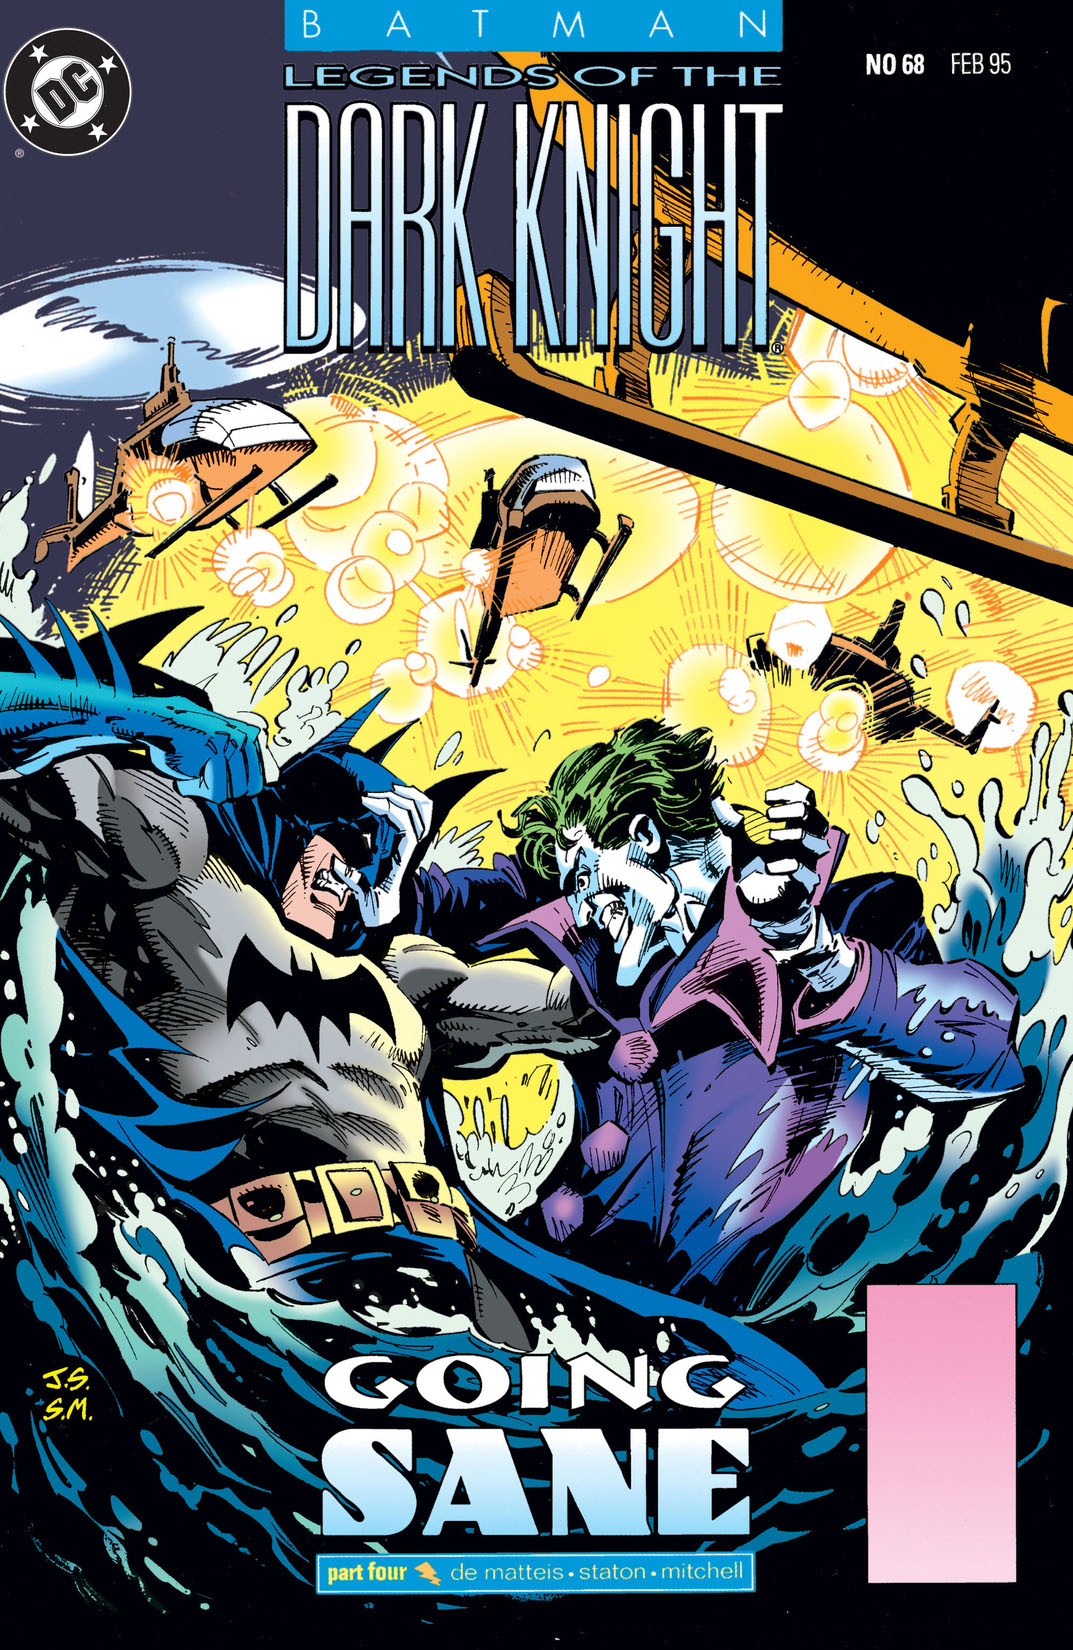 Batman: Legends of the Dark Knight #68 preview images